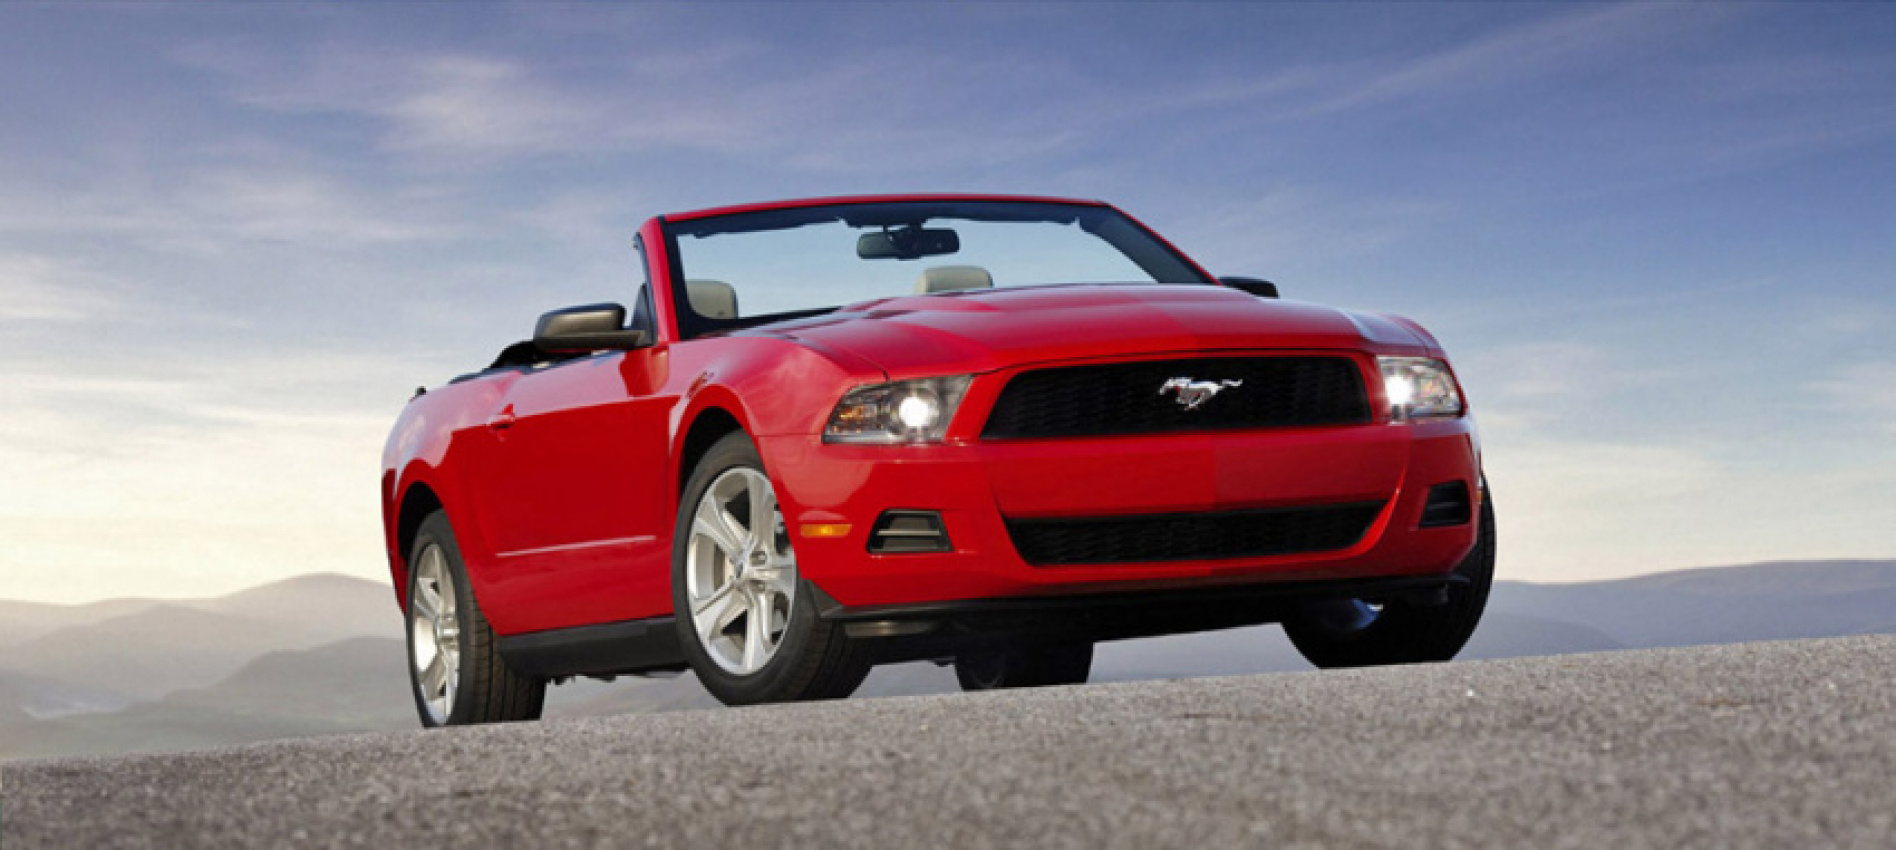 autos, cars, ford, review, 0-100mph 13-14sec, 0-60 5-6, 1/4 mile 13-14sec, 2010s cars, 300-400hp, convertible, ford model in depth, ford mustang, ford mustang gt, muscle, muscle car, mustang, 2010 ford mustang gt convertible